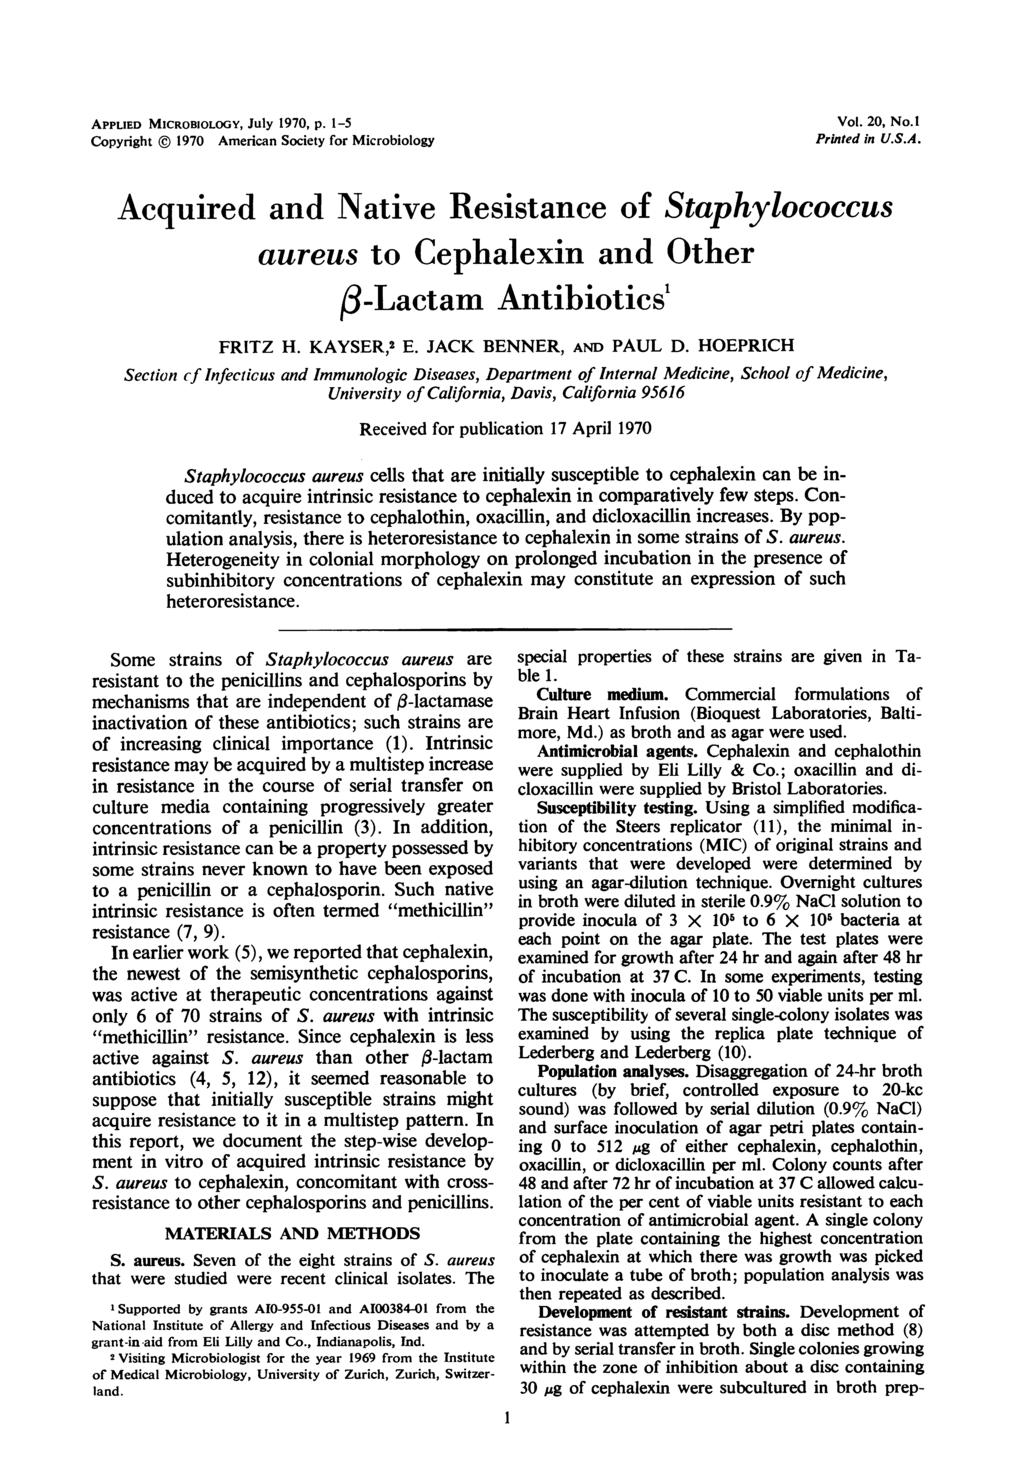 APPLED MCROBOLOGY, JUlY 1970, p. 1-5 Copyright 1970 American Society for Microbiology Vol. 20, No.1 Printed in U.S.A. Acquired and Native Resistance of Staphylococcus aureus to Cephalexin and Other f3-lactam Antibiotics' FRTZ H.